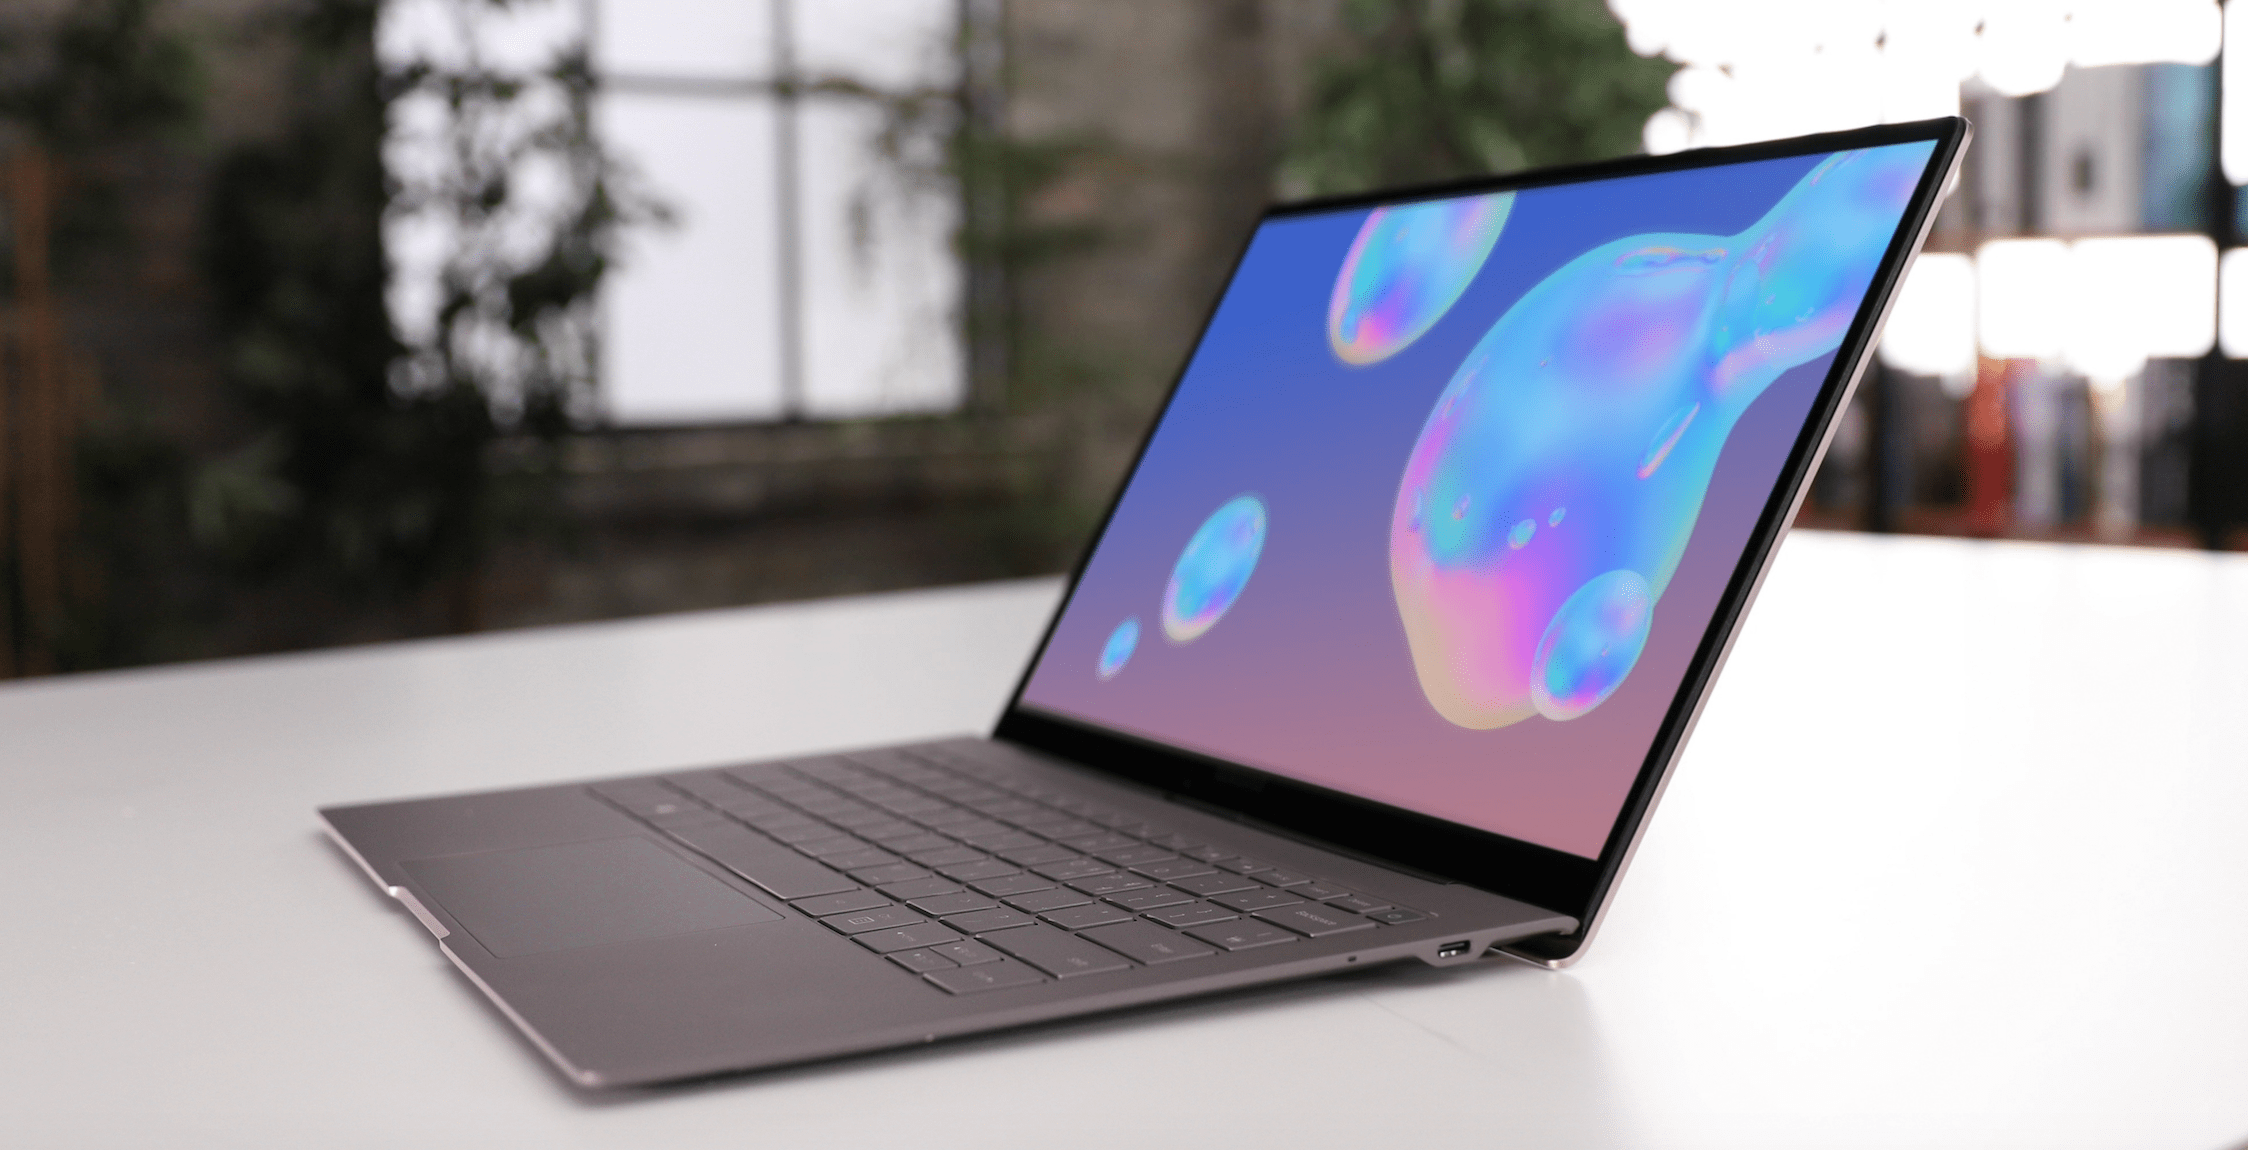 [New Post] Samsung Galaxy Book S: Review, Specs and Price Australia